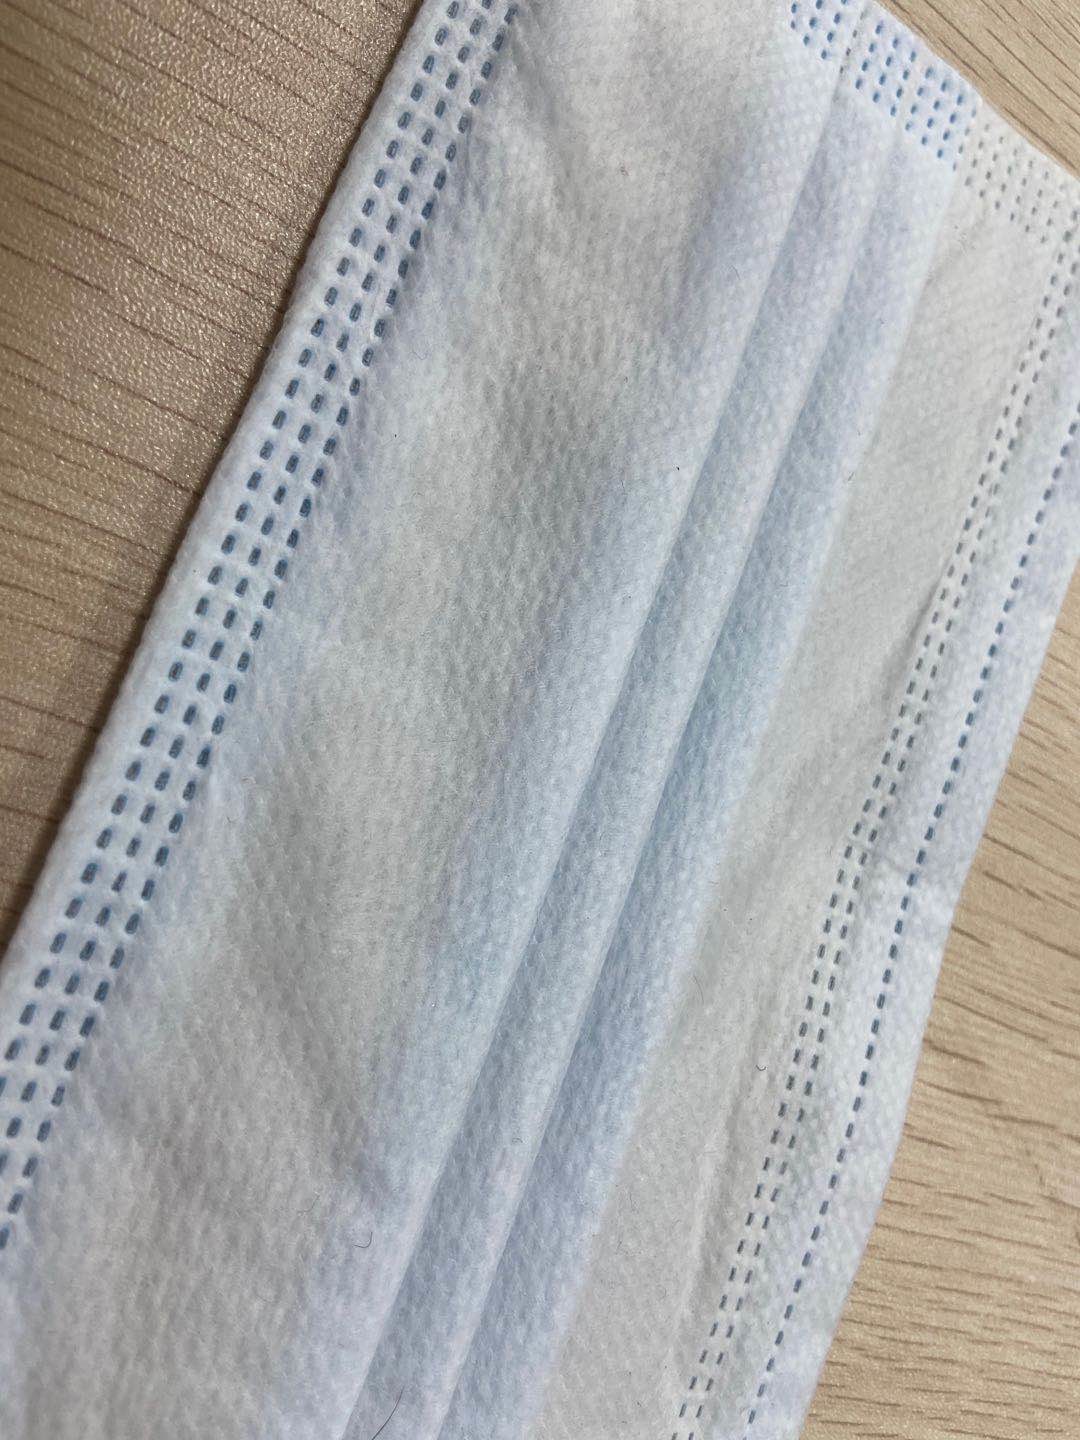  Disposable Pollution Mask Antiviral 3 Ply Non Woven Mask Hypoallergenic Manufactures